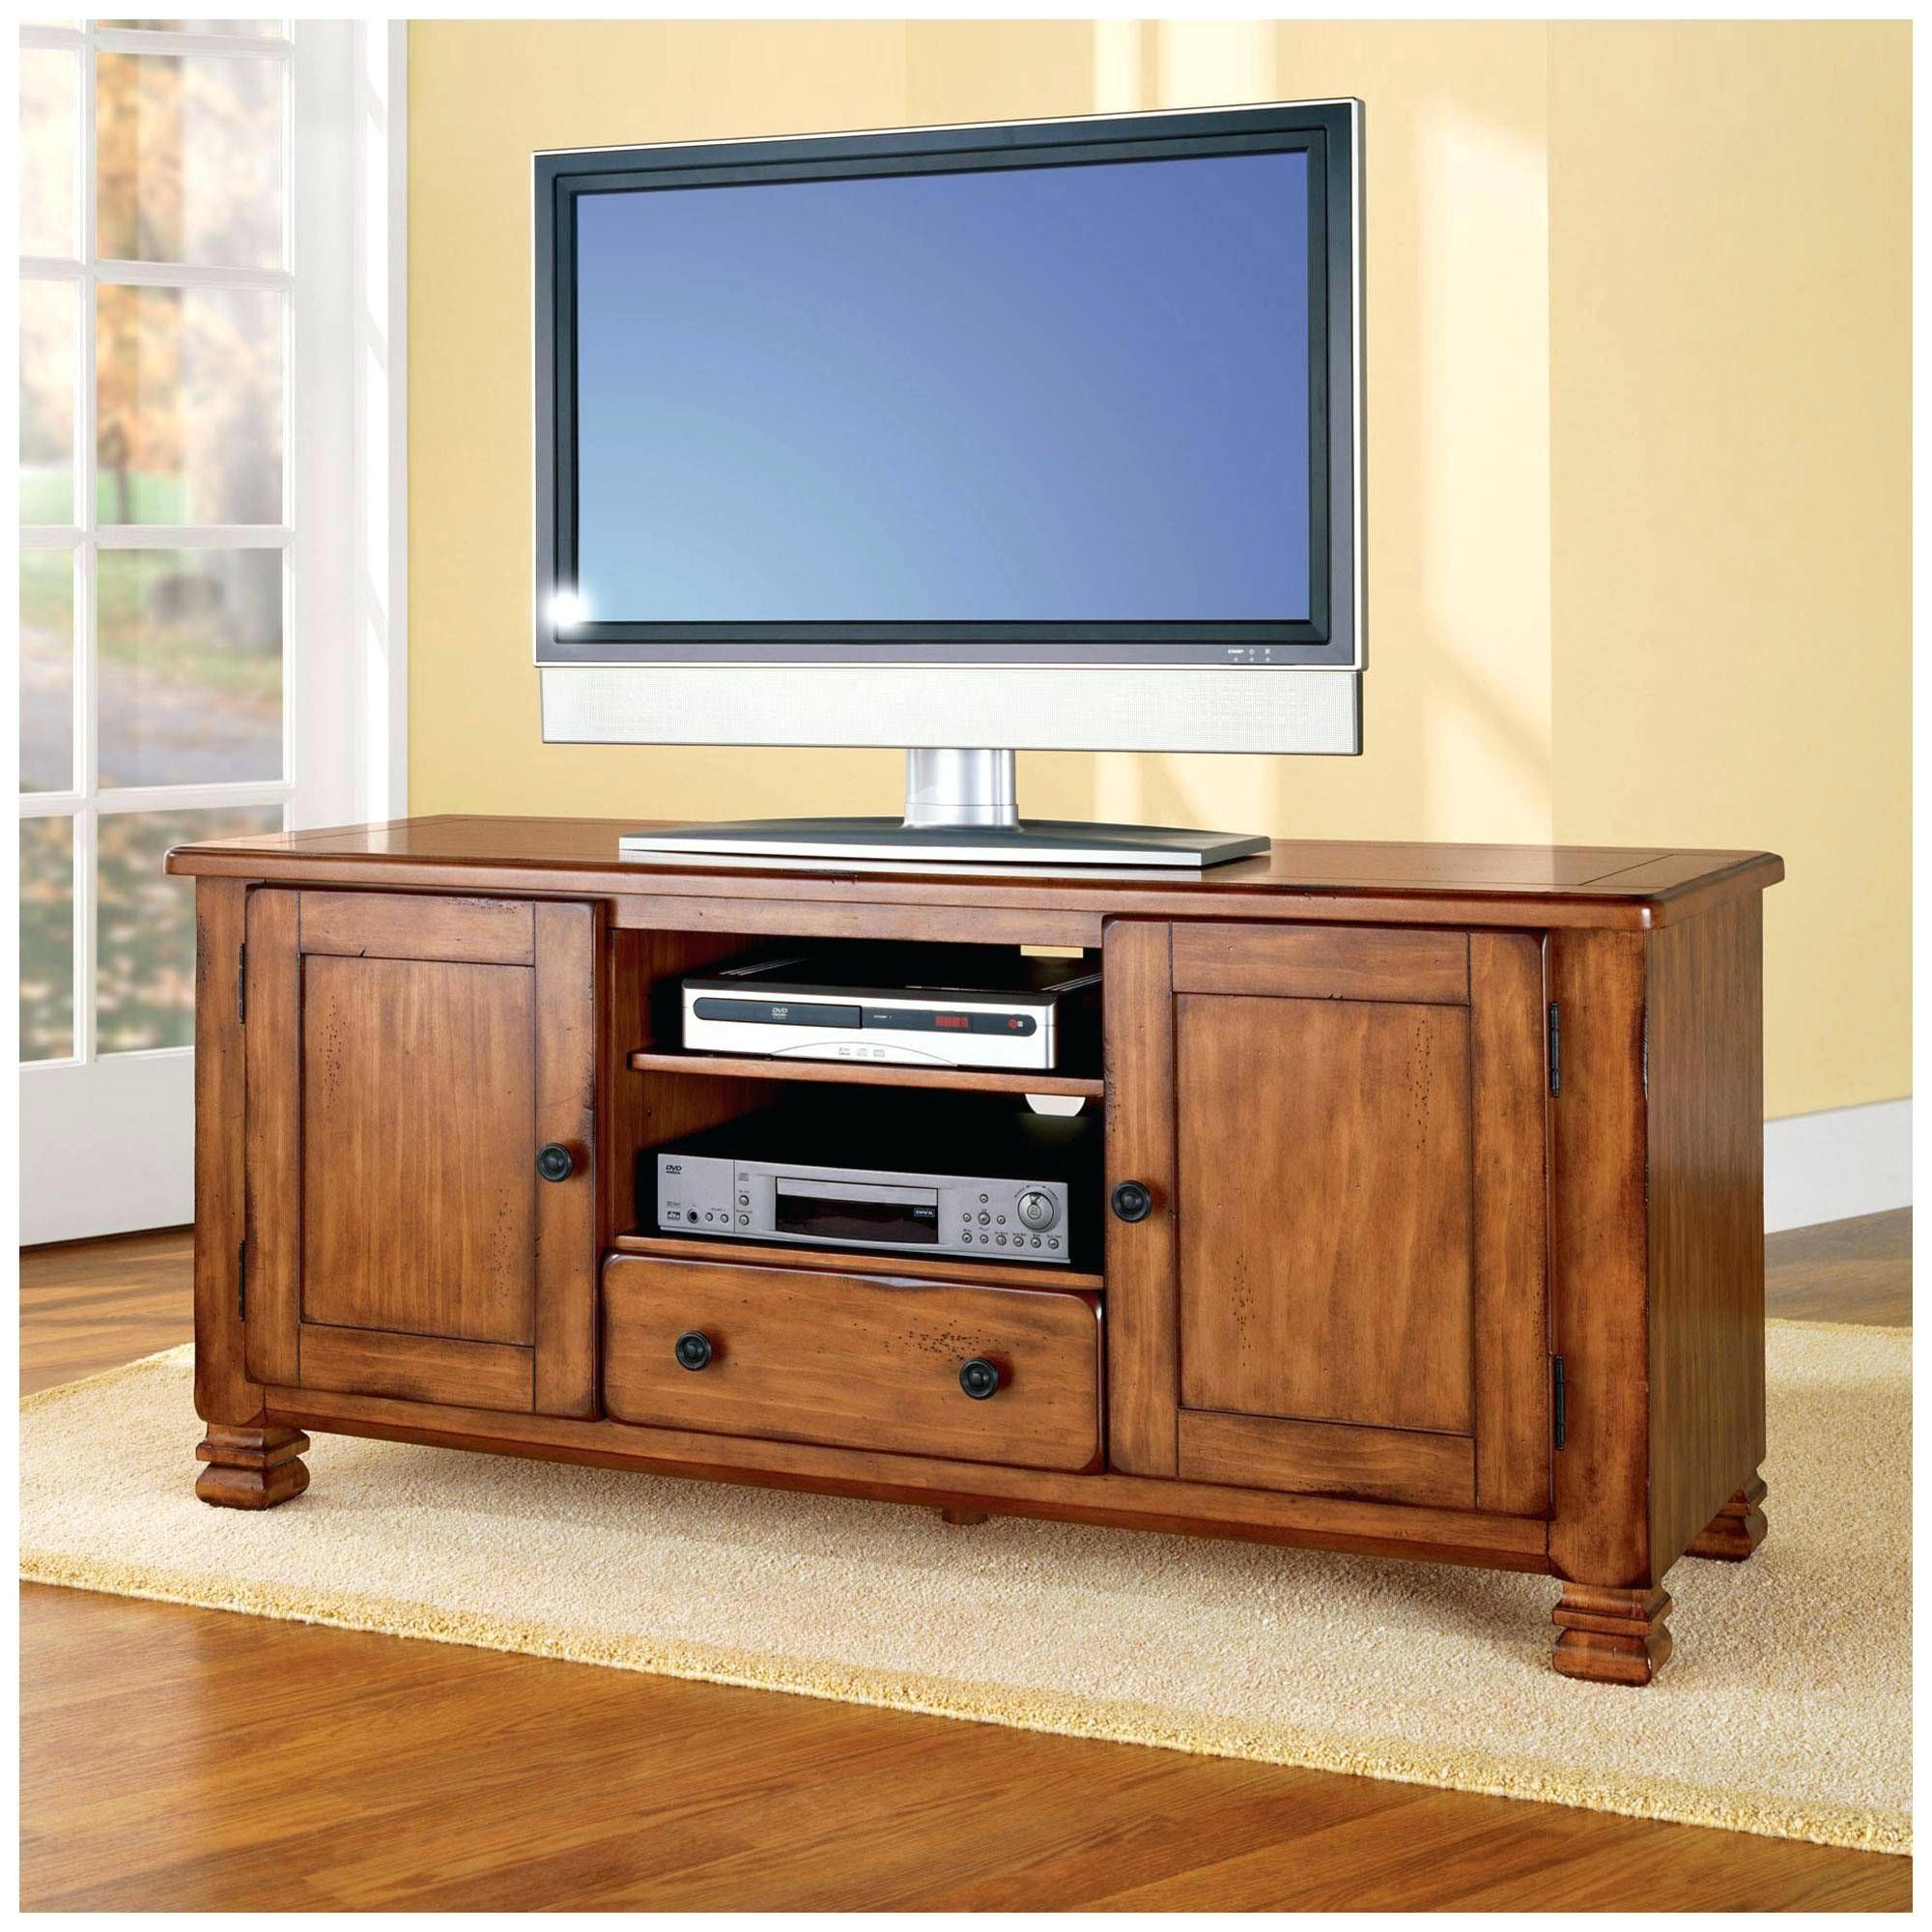 Tv Stand: Awesome Tall Oak Tv Stand Images. Furniture Ideas (View 2 of 15)